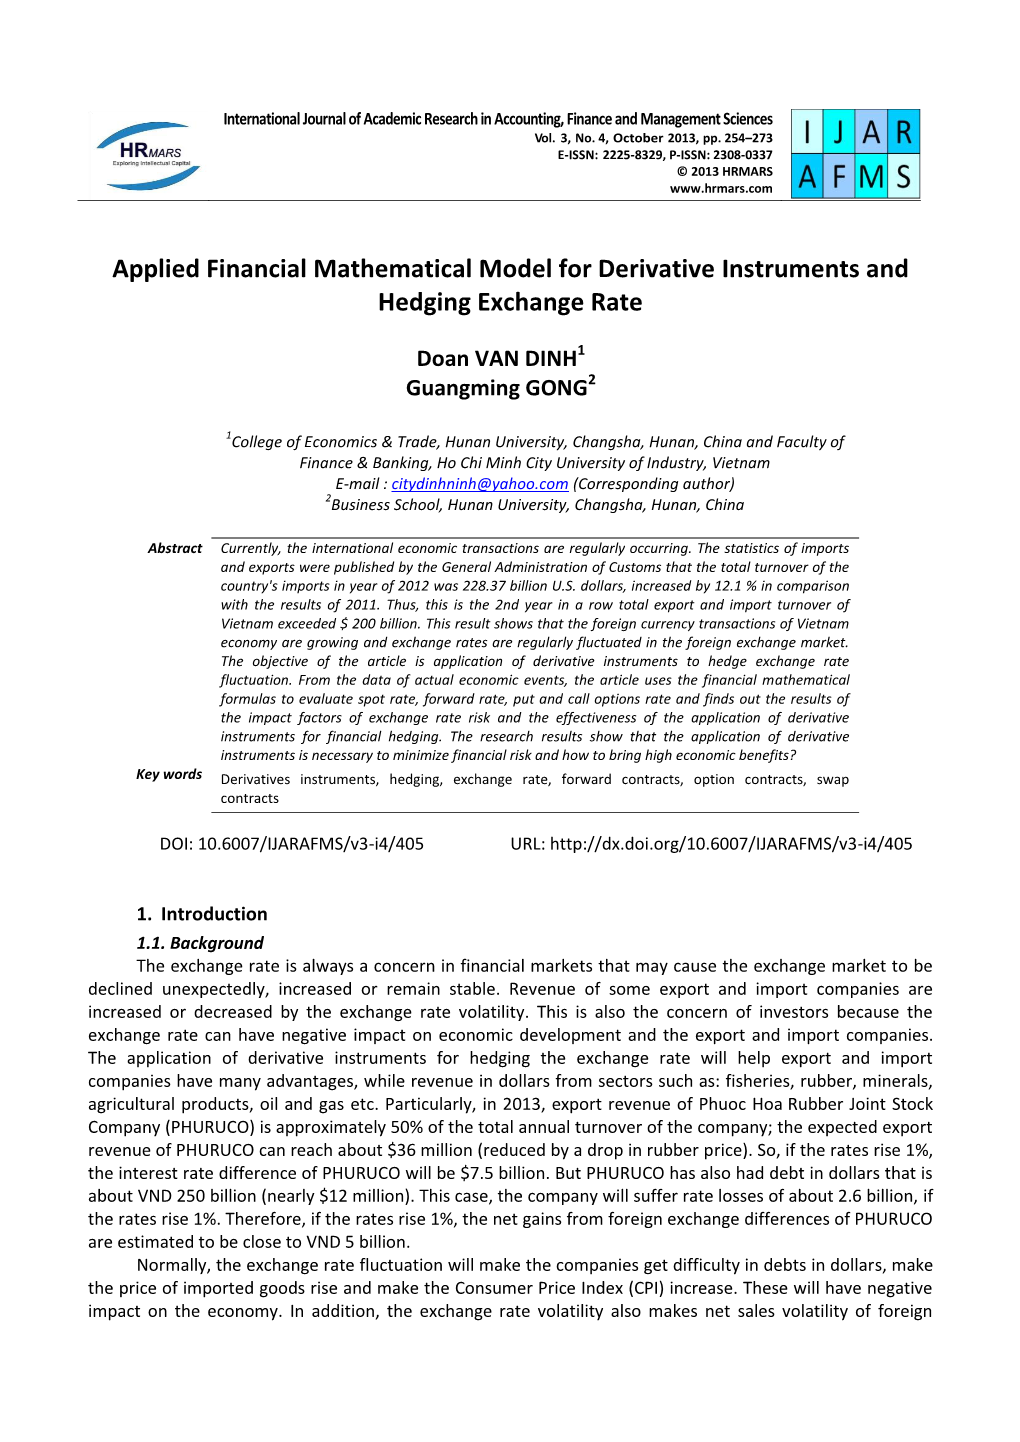 Applied Financial Mathematical Model for Derivative Instruments and Hedging Exchange Rate